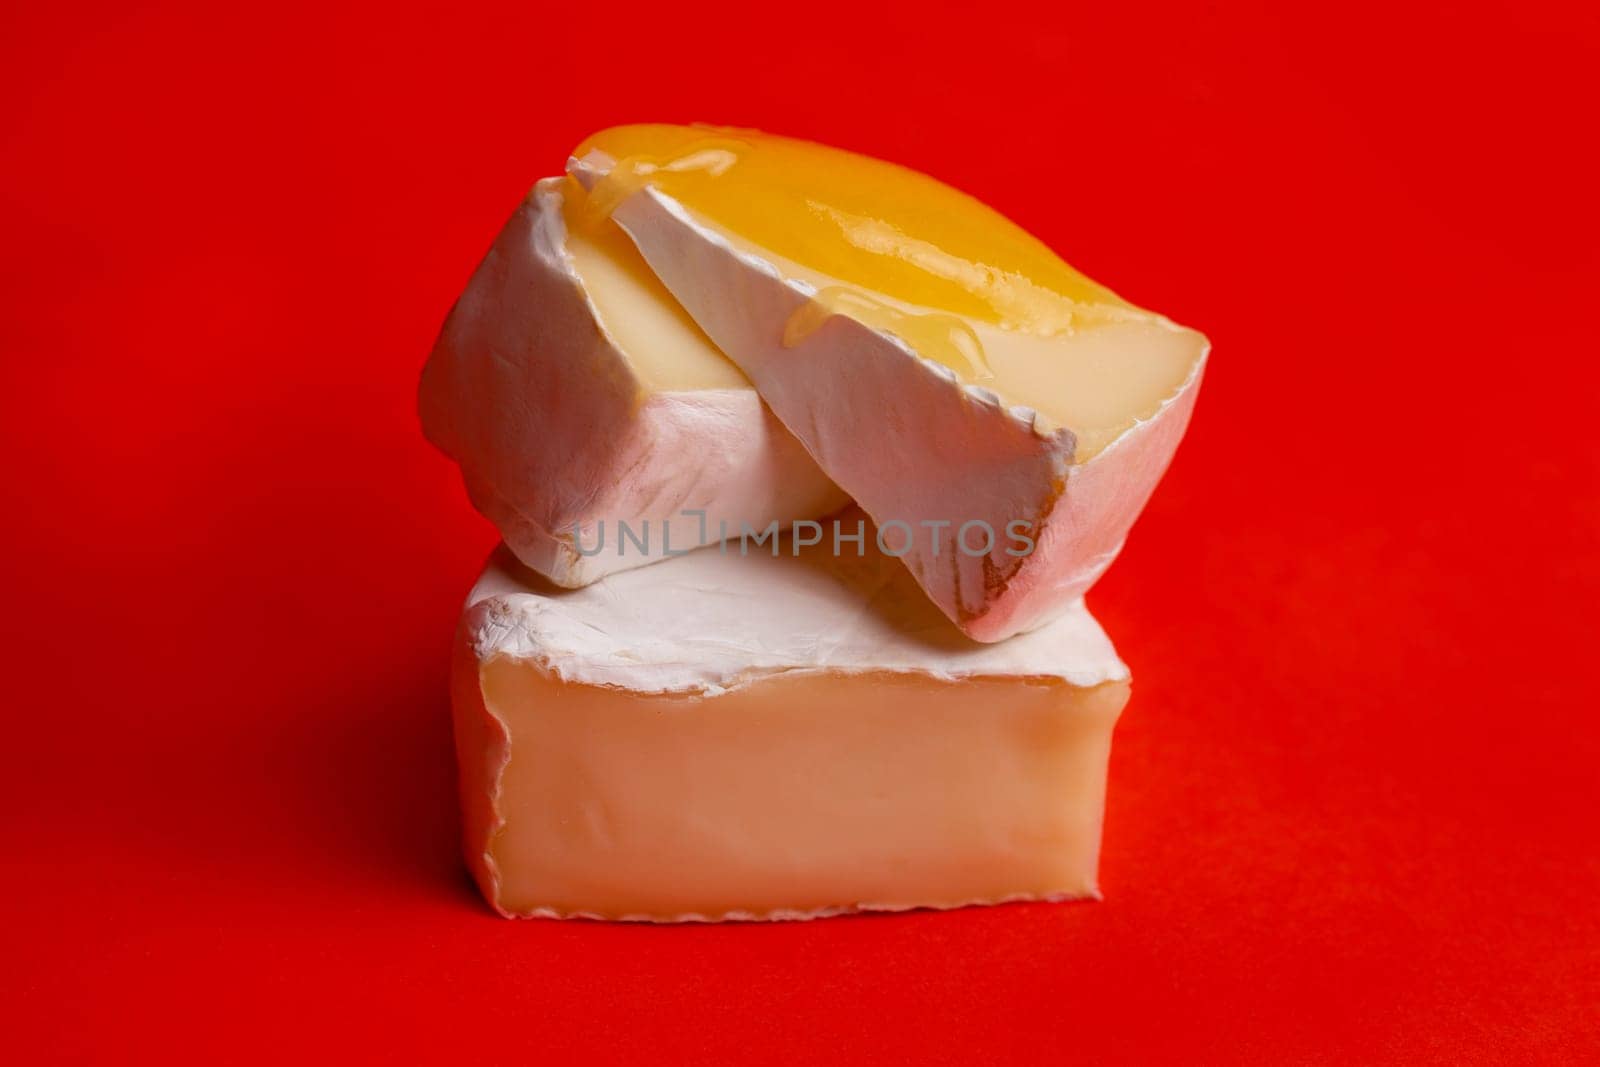 soft cheese with white mold and honey on a red background